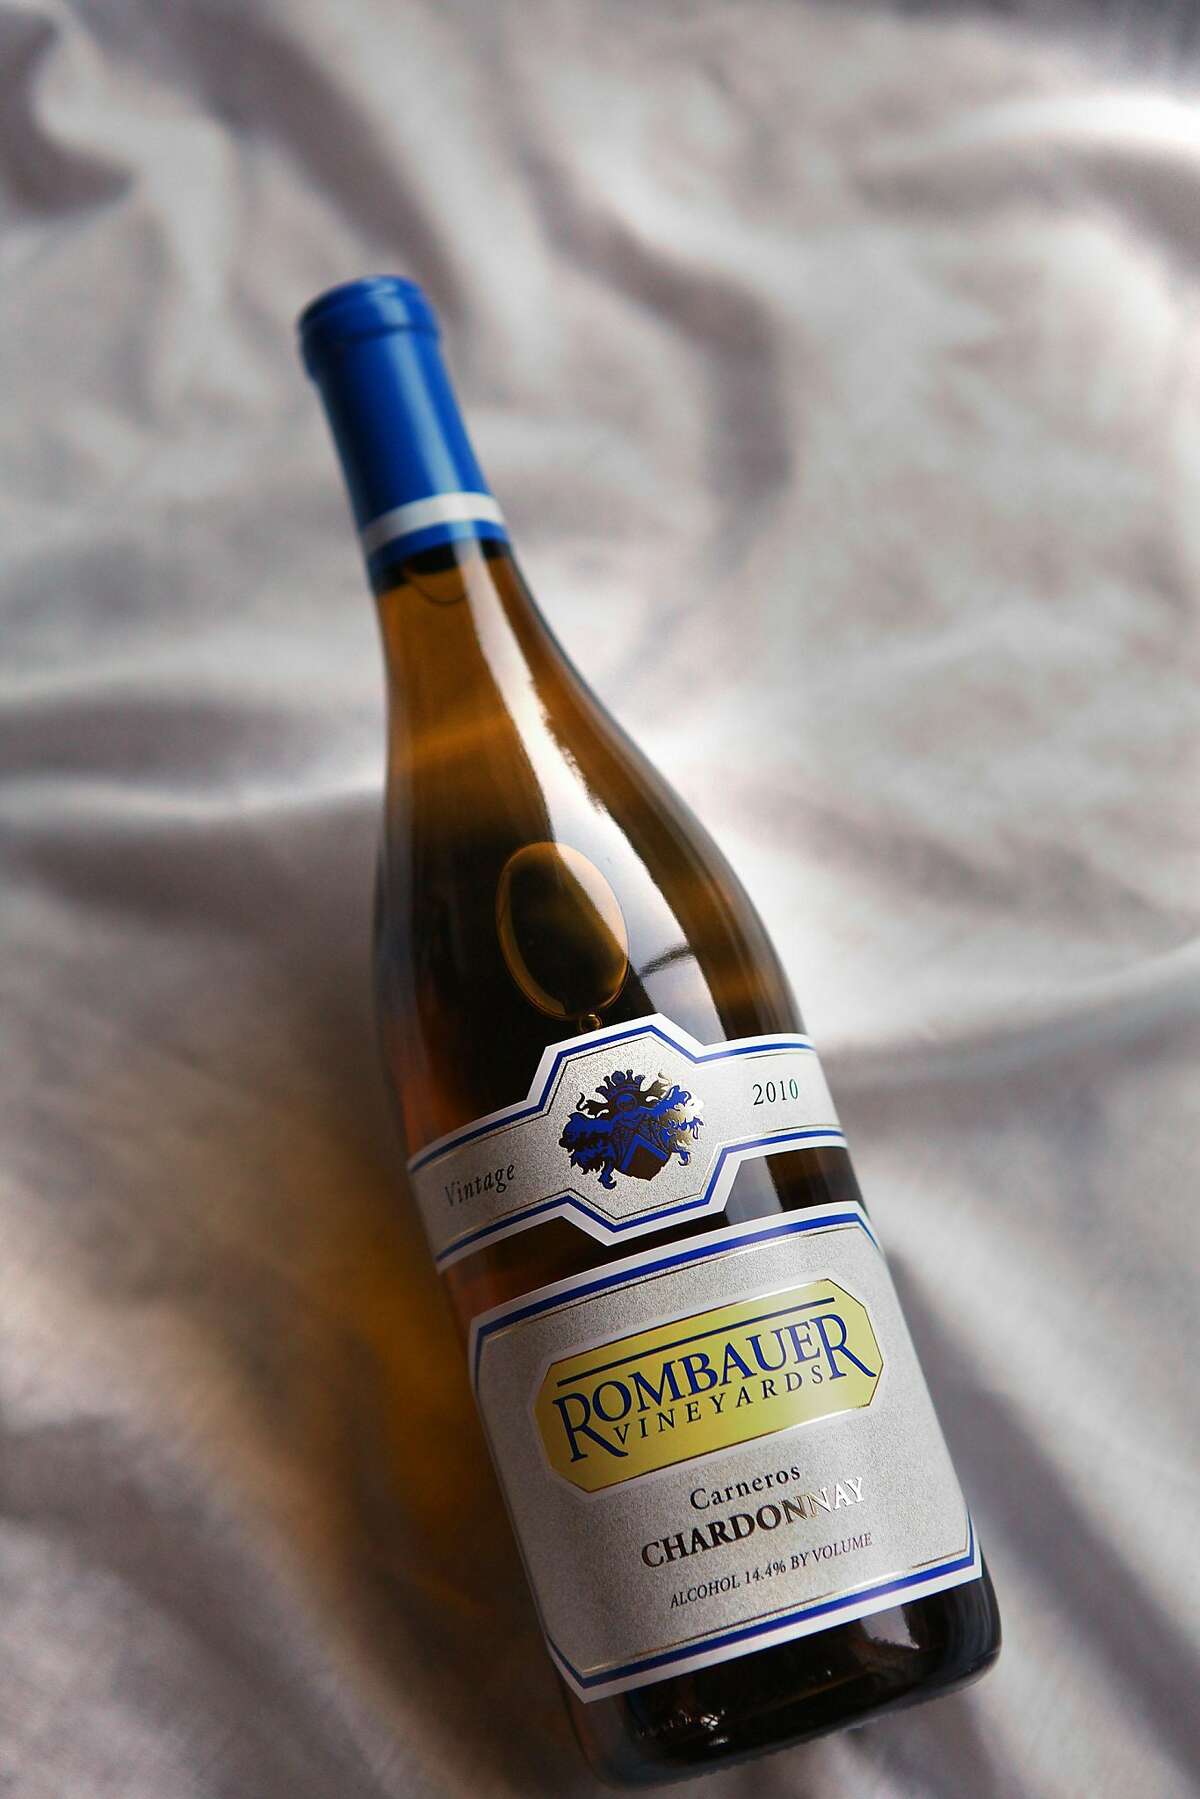 One of Timothy Ferriss' s favorite objects is his favorite bottle of chardonnay wine from Rombauer vineyardson Friday, December 2, 2011, at home in San Francisco, Calif.